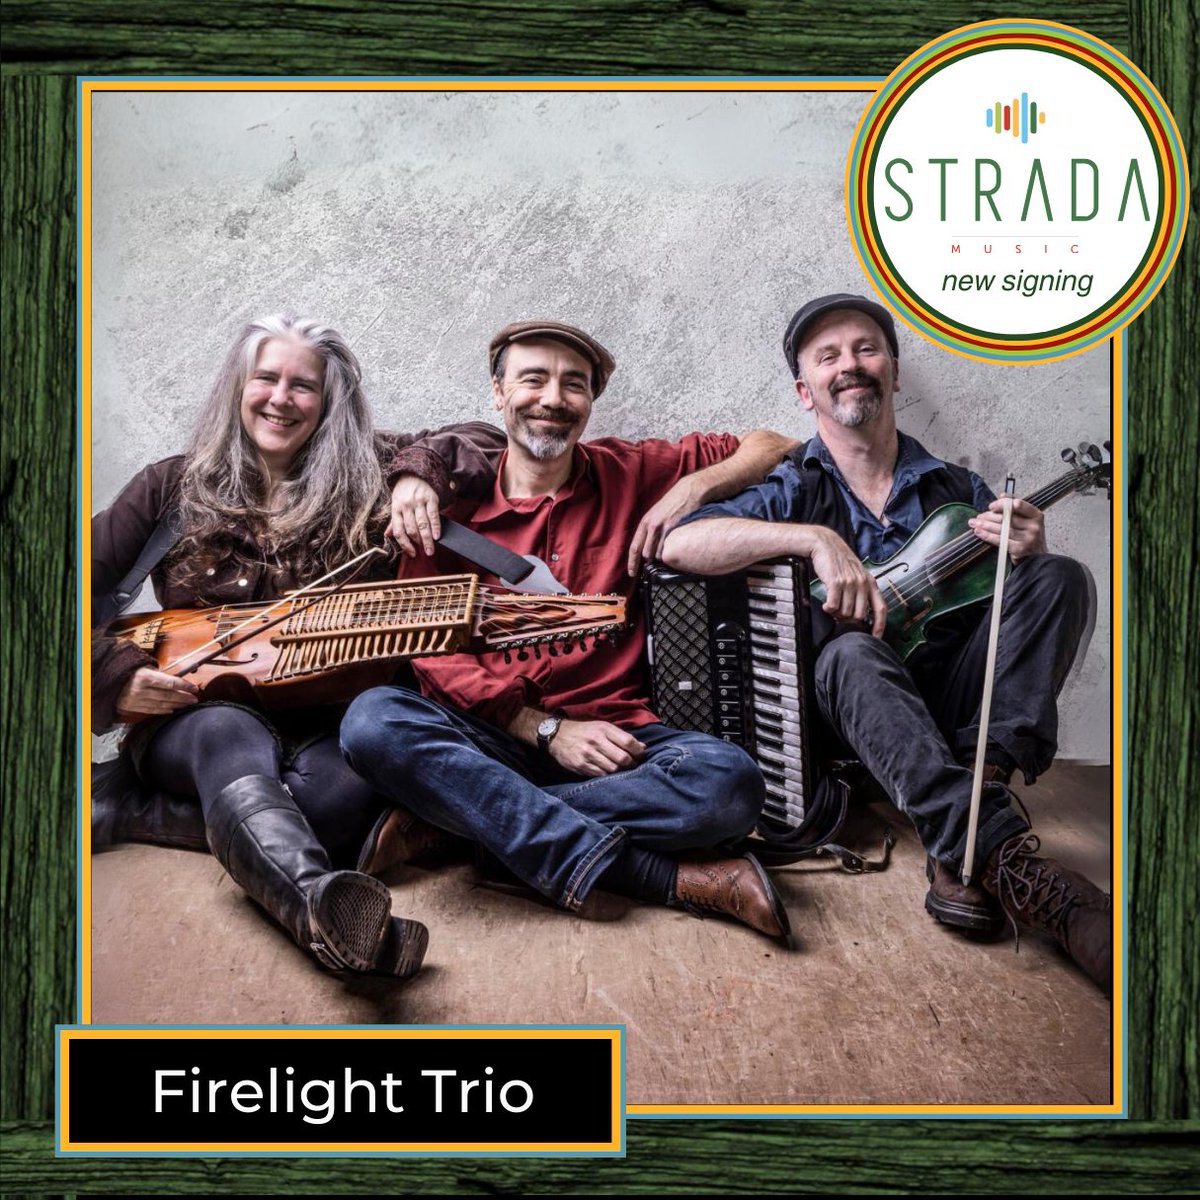 📣NEW SIGNING Firelight Trio 🎊 We are very proud to welcome Firelight Trio to our roster, working with agent Liz Lenten BEM @lizlenten and can’t wait to get their show on the road🚐. Read Read More | Bookings ↙️ stradamusic.com/artist/firelig… #musicagency #promoters #songlines